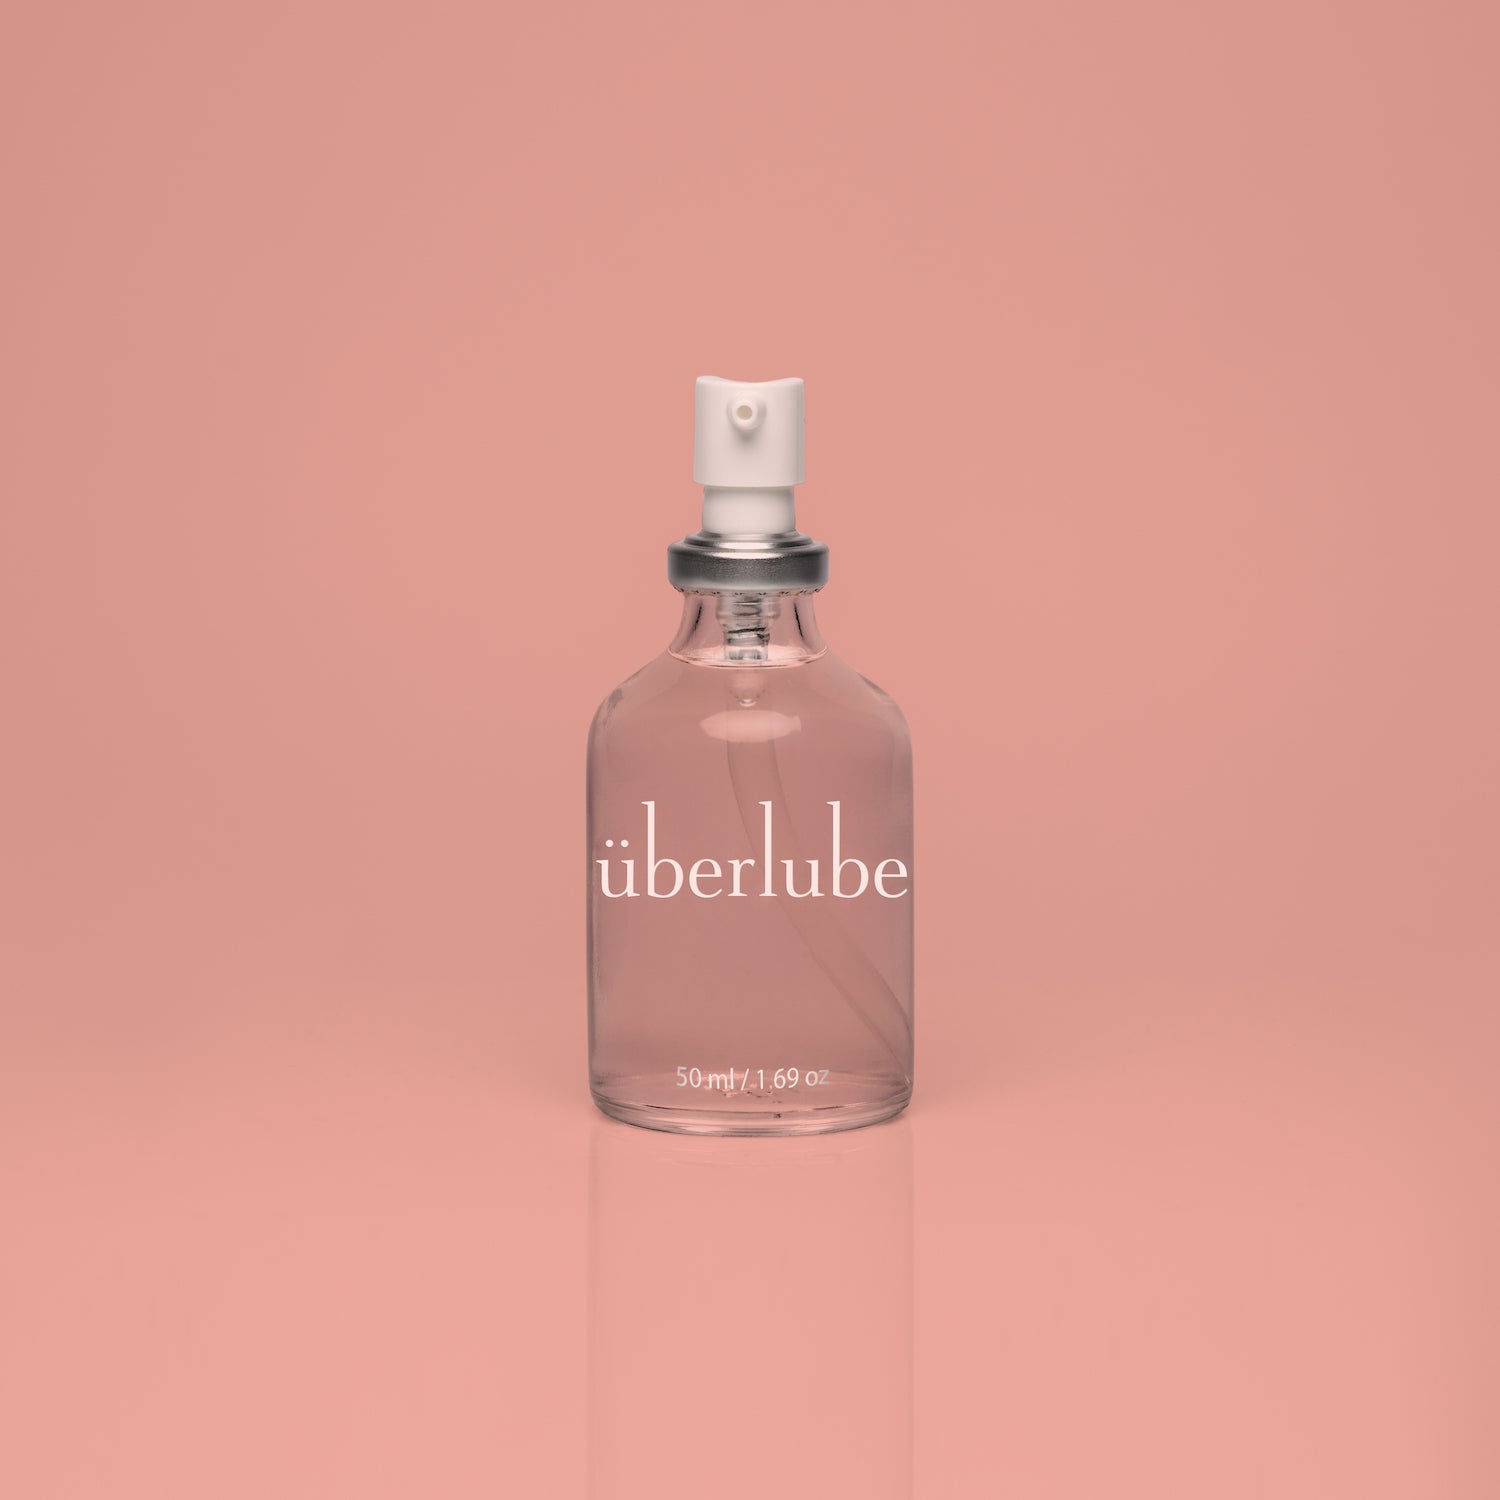 Überlube Lubricant | Lorals | For comfort and pleasure during intimacy